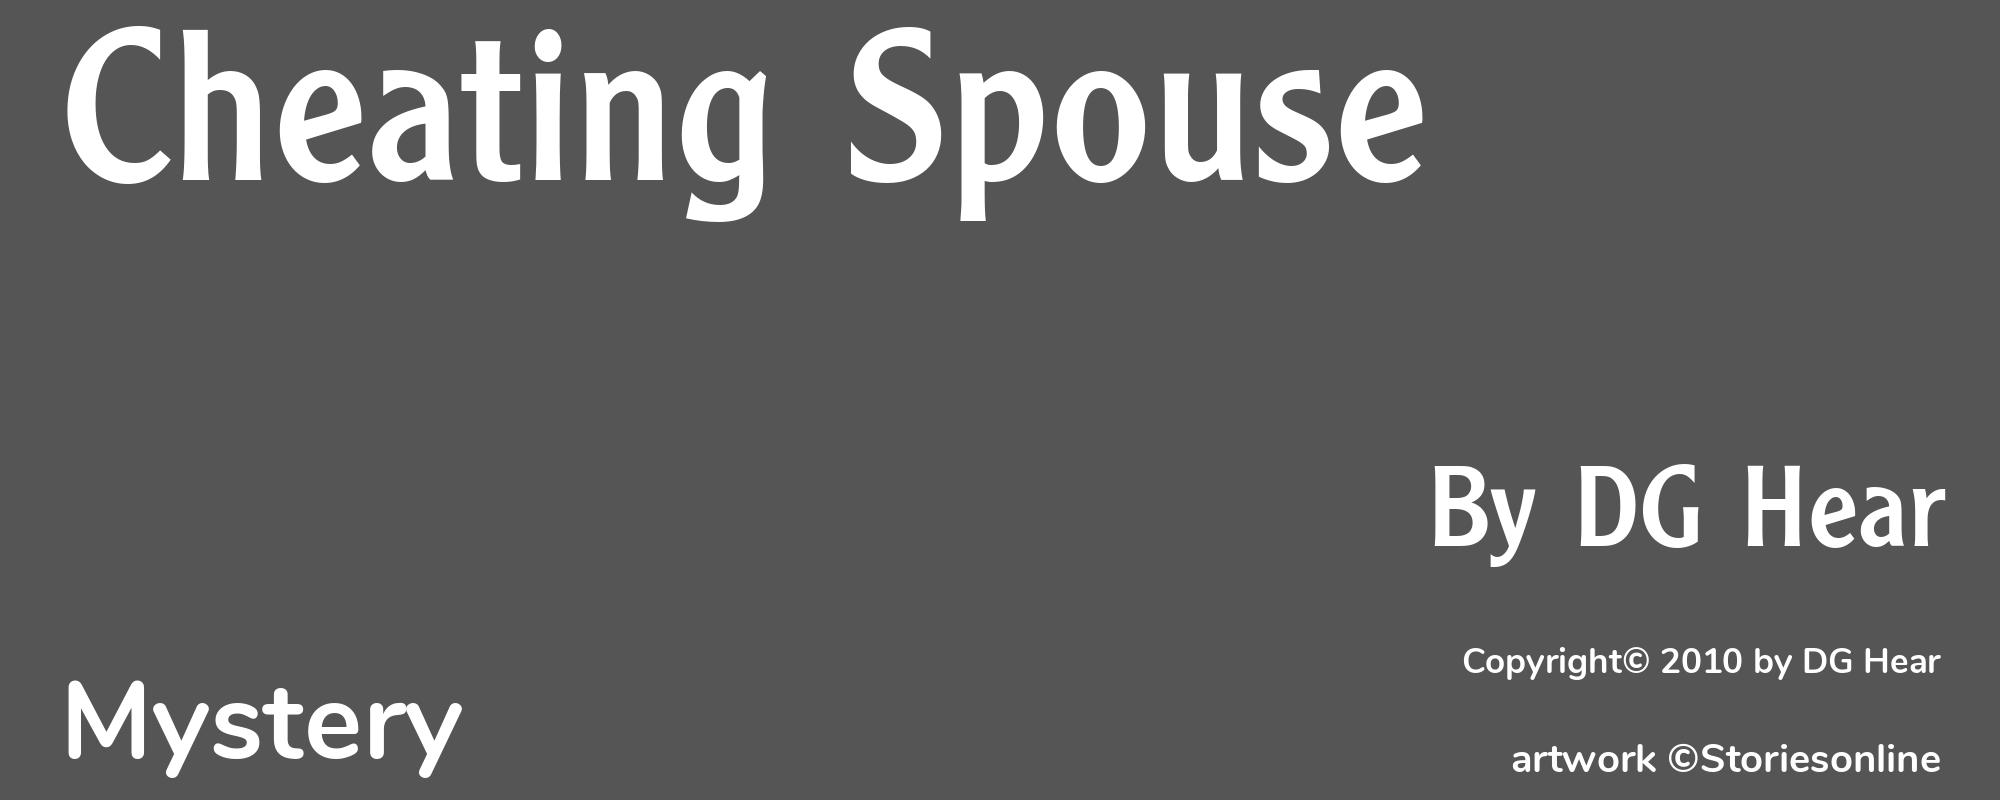 Cheating Spouse - Cover